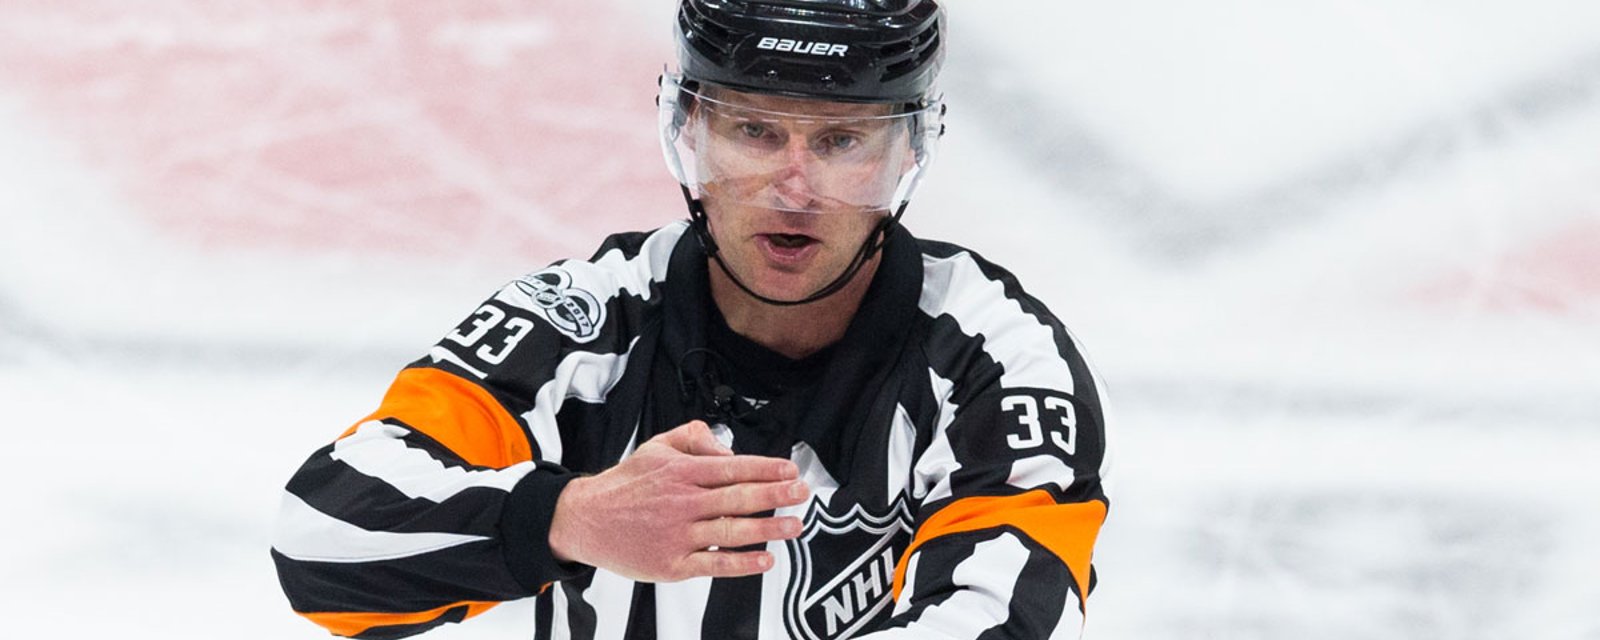 Must see: NHL star player gets publicly scolded by referee